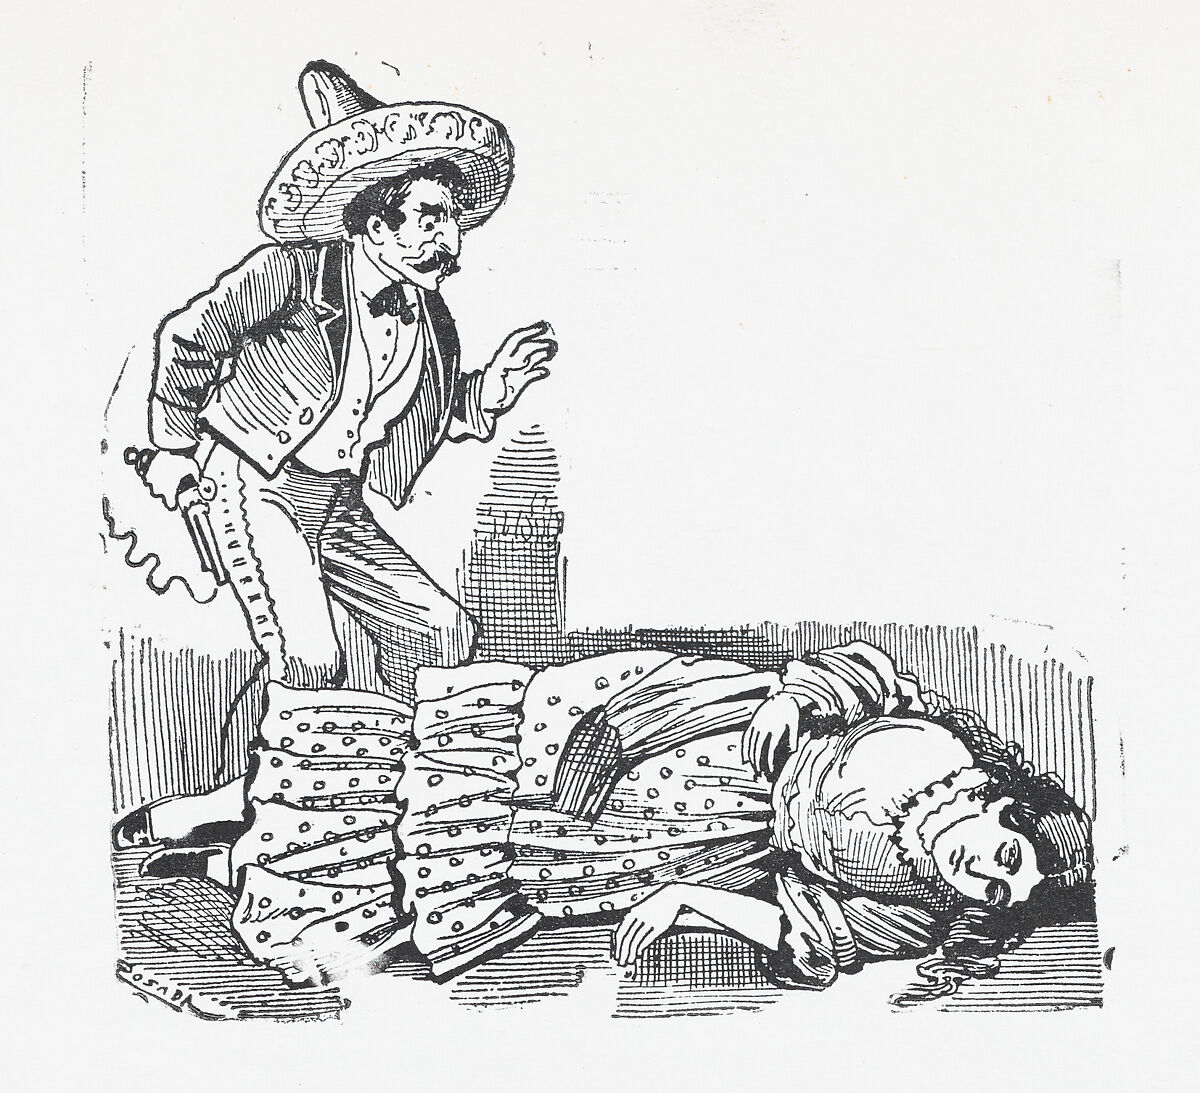 A man with a gun standing over a woman he has just shot, José Guadalupe Posada (Mexican, Aguascalientes 1852–1913 Mexico City), Zincograph 